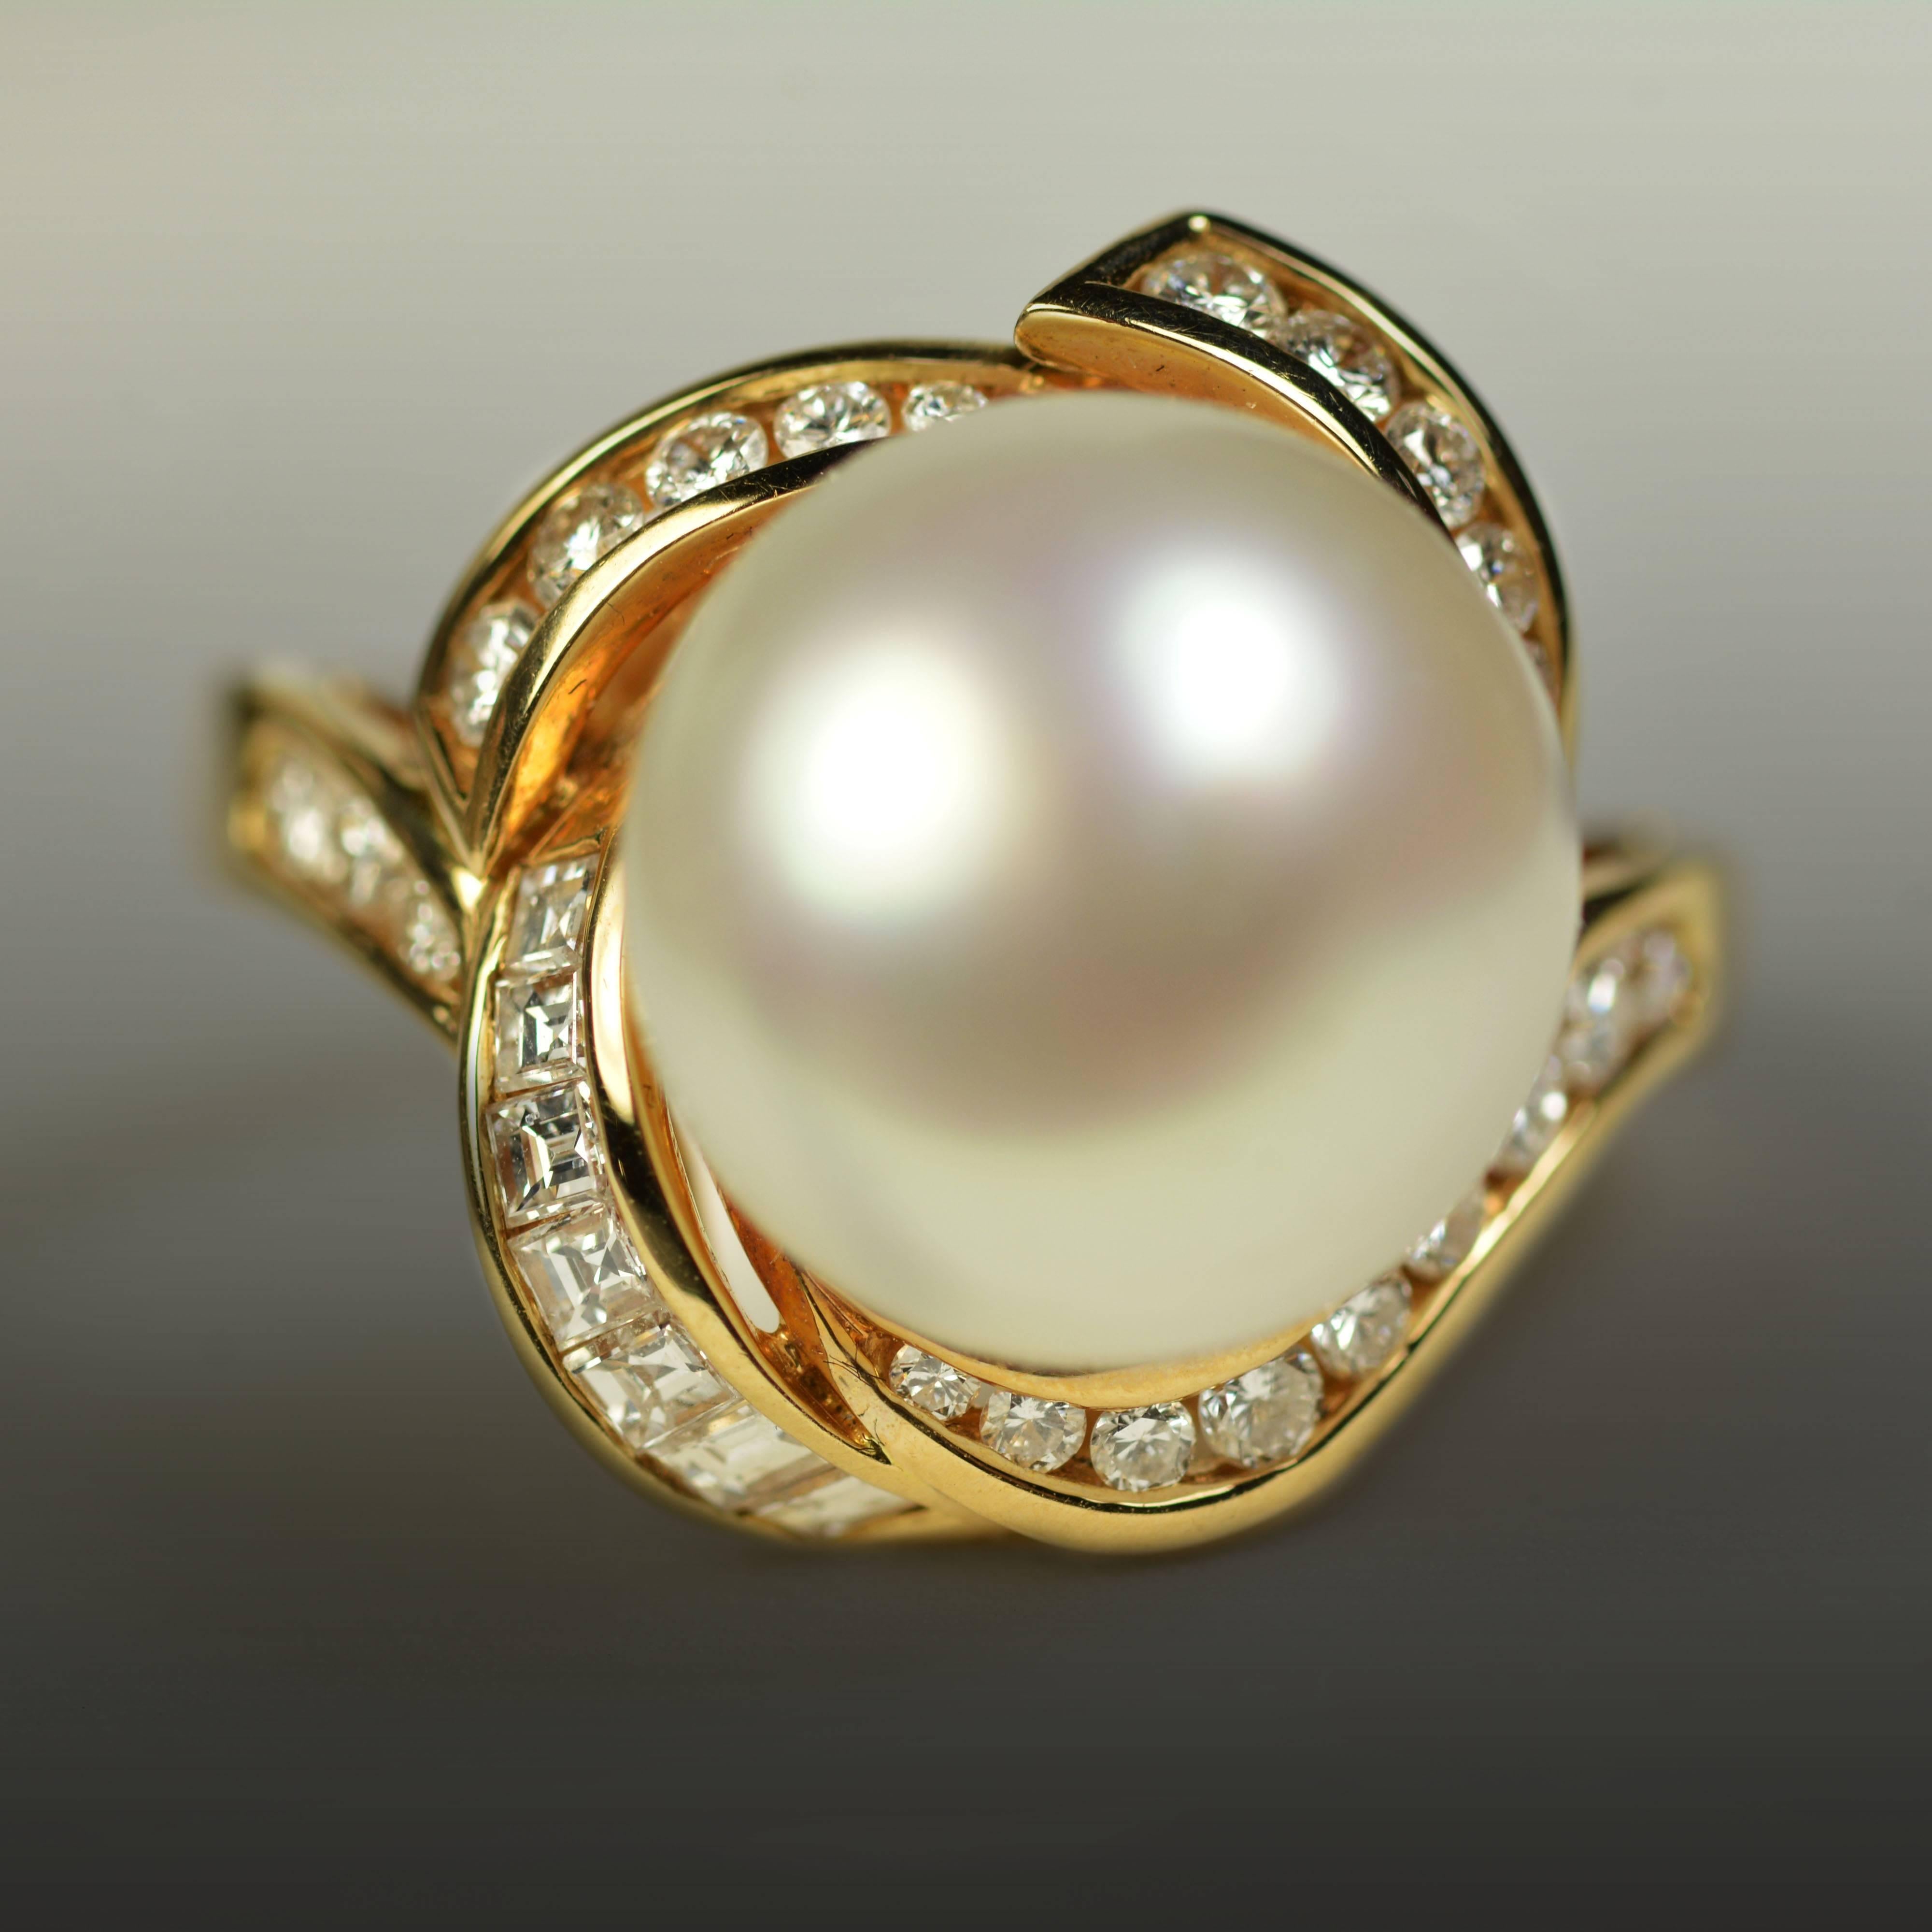 18k Ring with 12.5 mm South Sea Pearl and 0.78 carats of round brilliant and square diamonds.